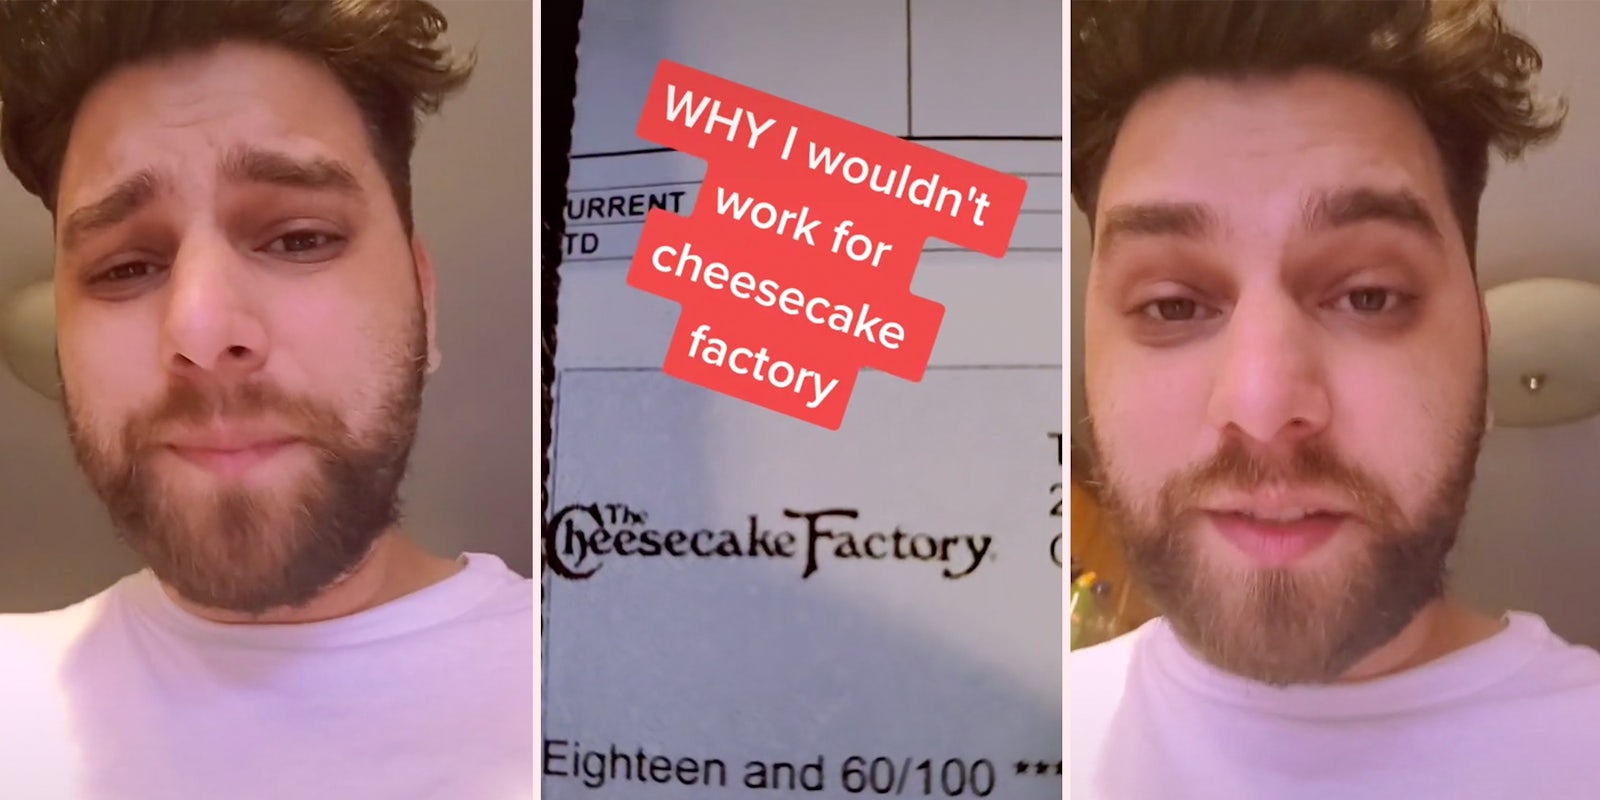 TikToker calls out Cheesecake Factory over employment contract